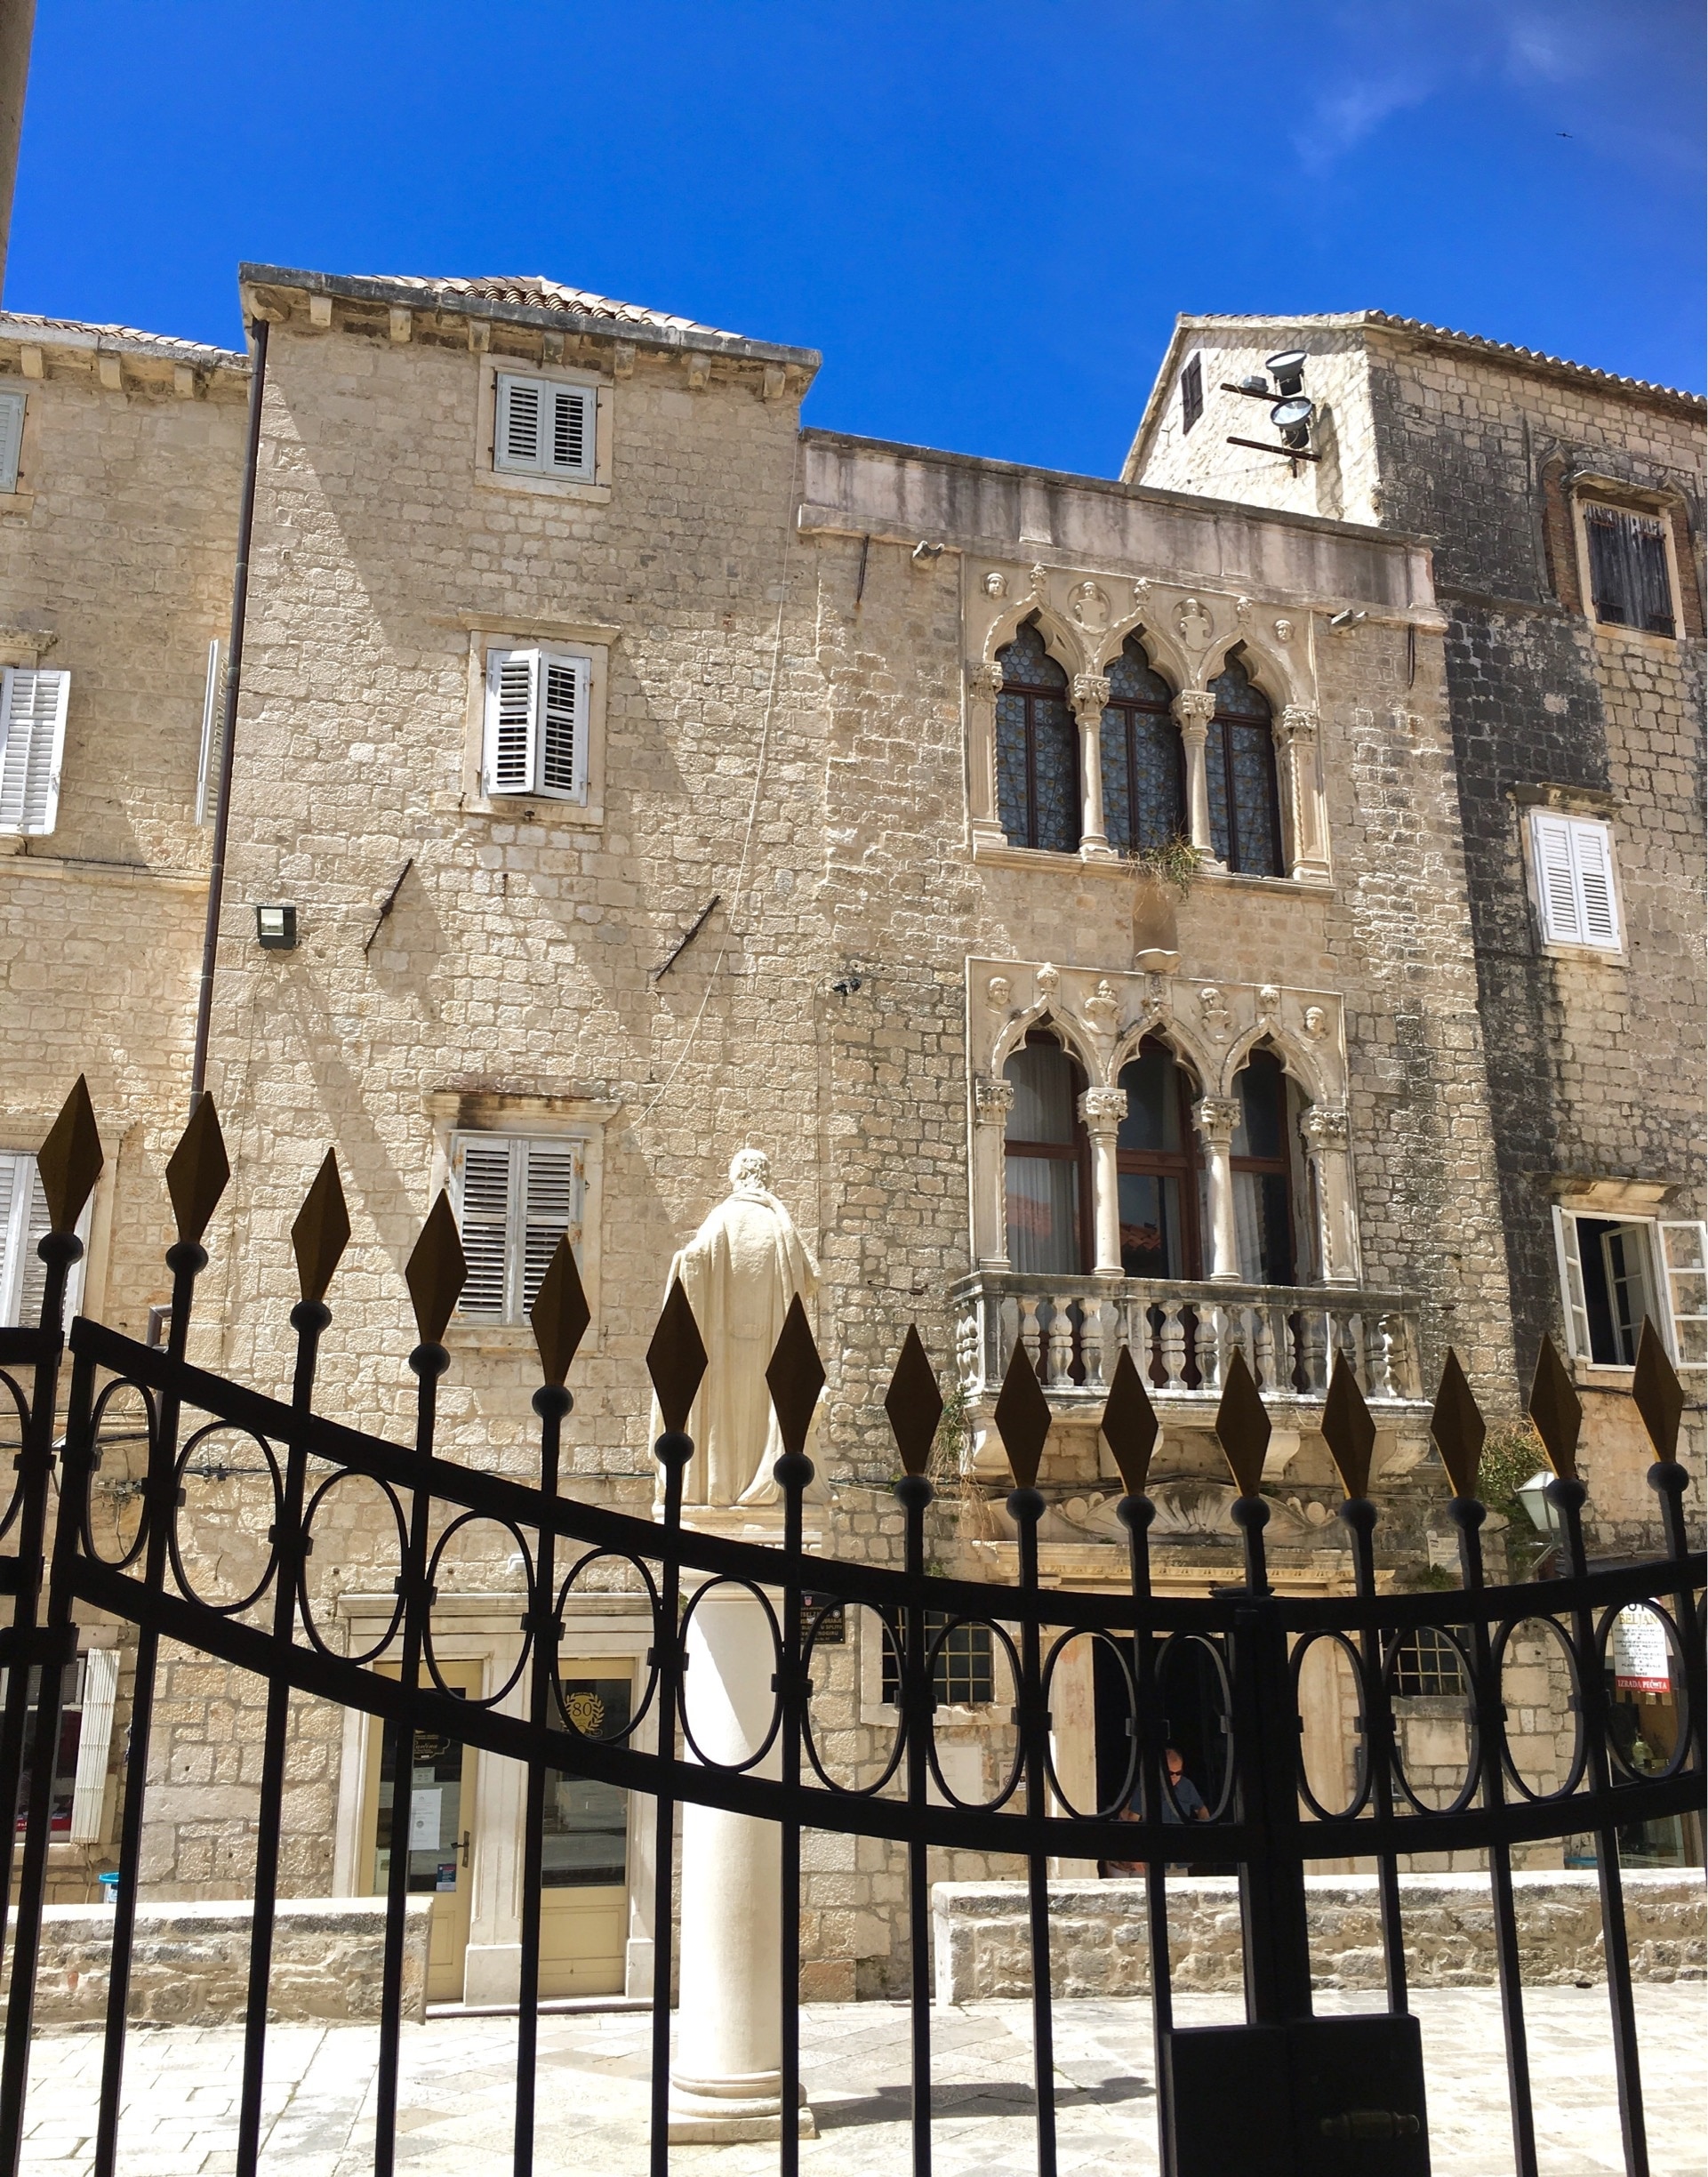 Cipiko Palace in Trogir, opposite the cathedral, was the house of a prominent family during the 15th century.
